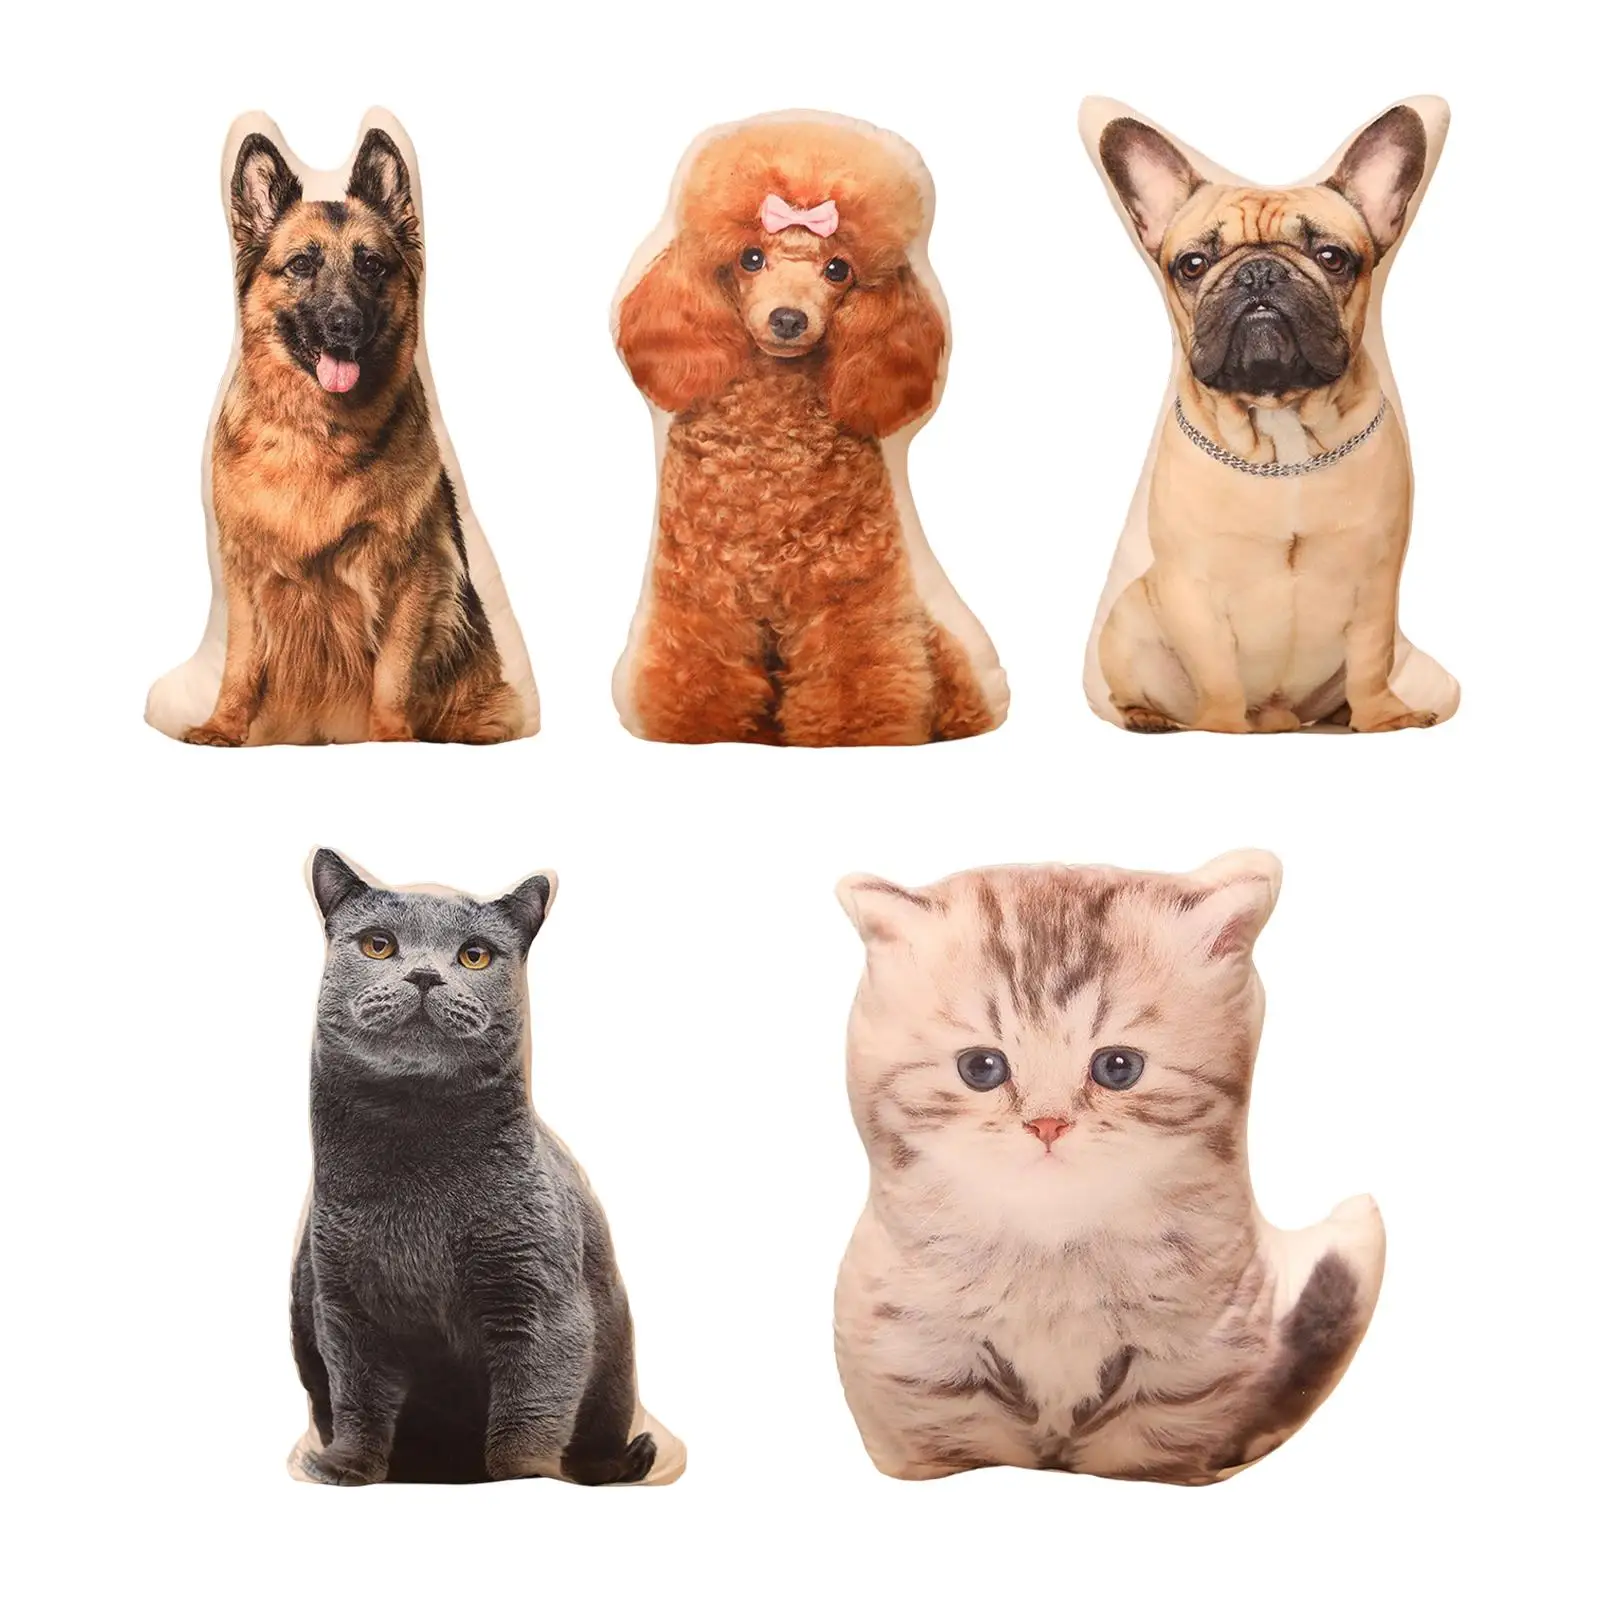 Soft Plush Toy Collectible Animal Doll Toys 50cm Cuddly Decor Adorable Puppy Kitten for Home Bedroom sofa Living Room